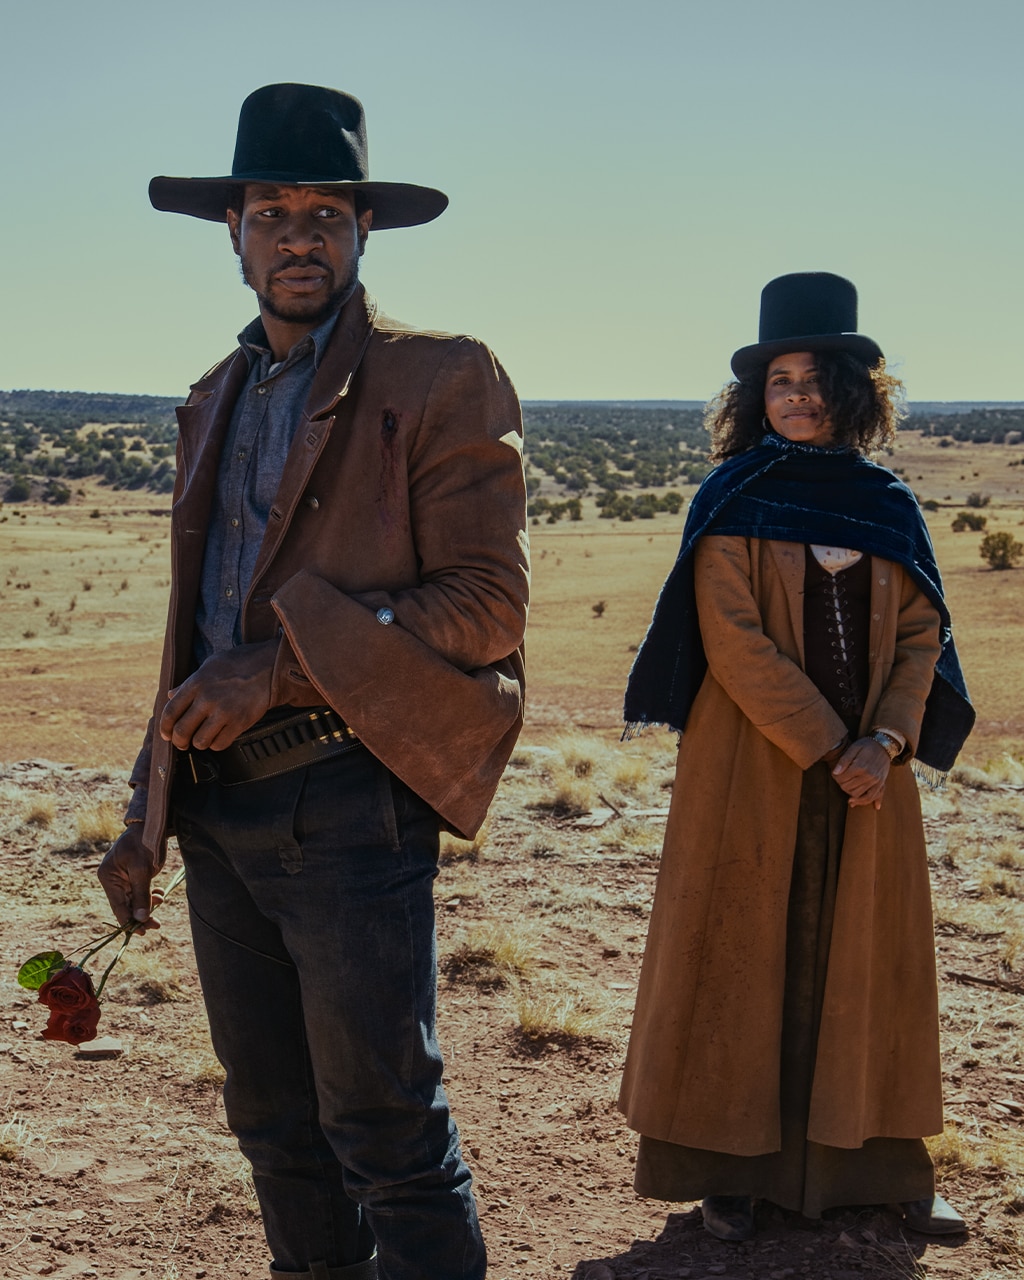 The Harder They Fall': Black Westerns Enter a New Era - The New